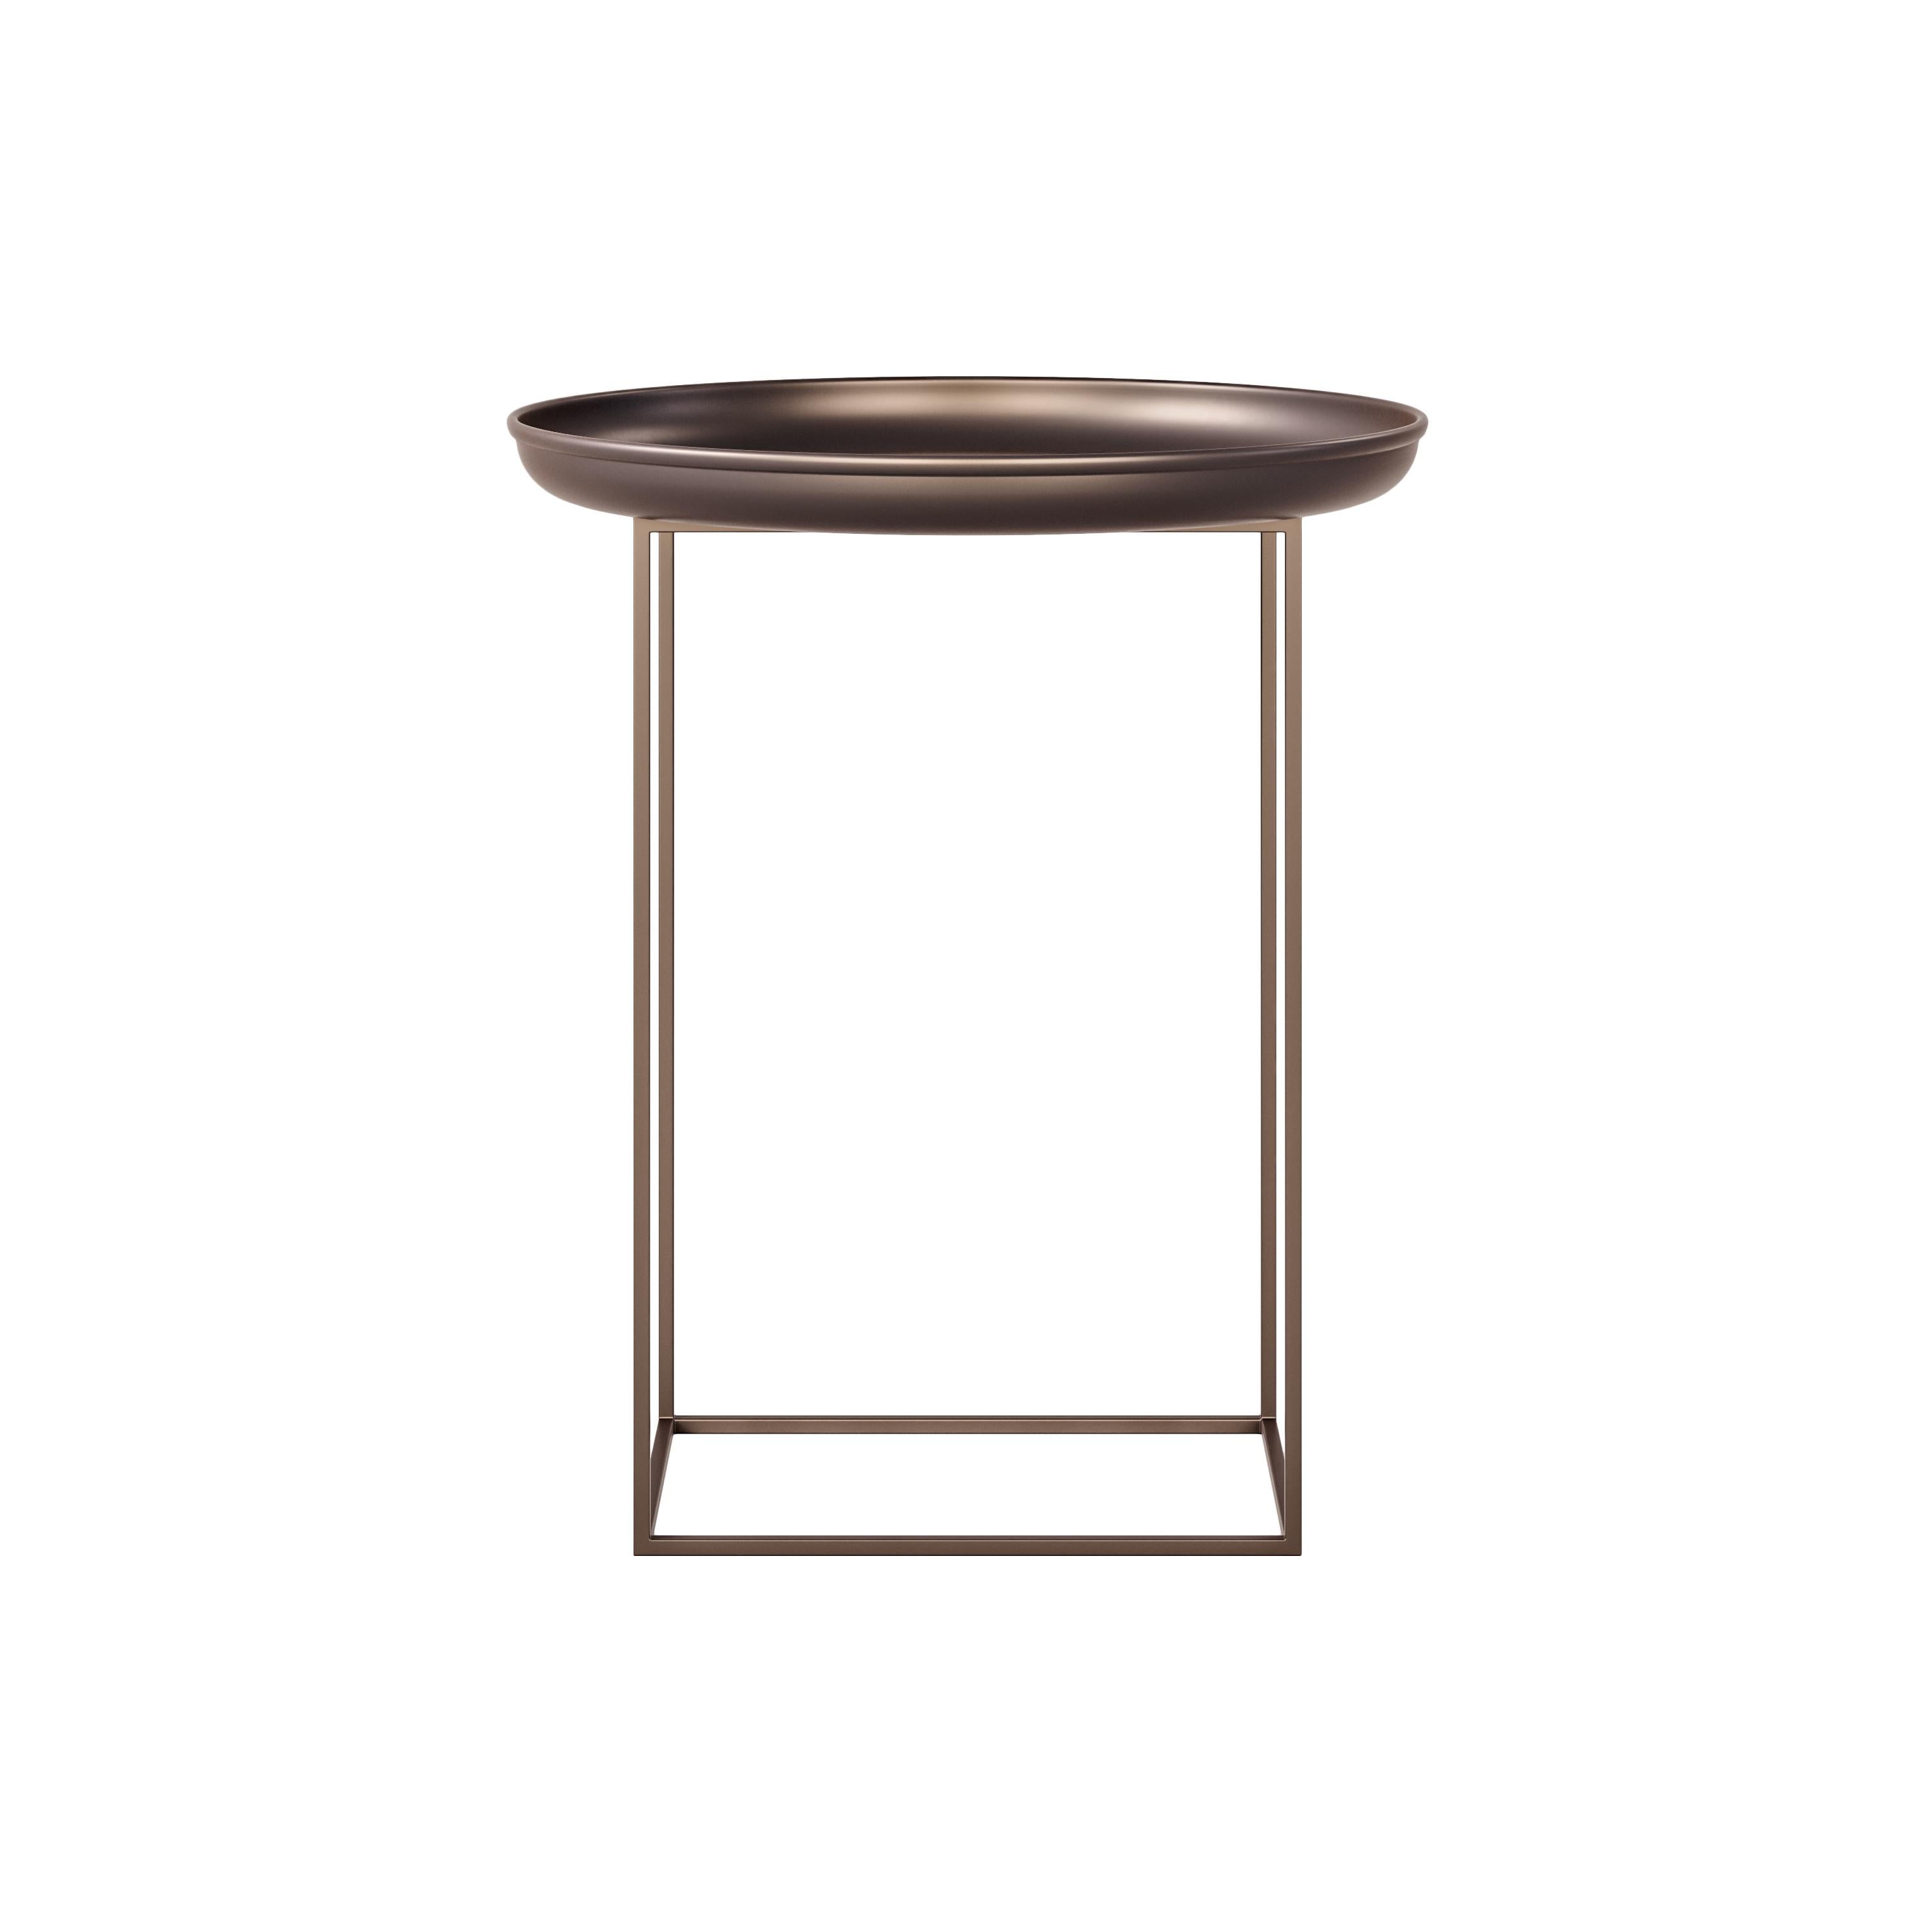 Duke Small Antique White Iron Side Table by NORR11
Dimensions: Ø 45 x H 52 cm.
Materials: Powder coated iron.

Available in three different sizes. Different colors available: Antique White, Stone, Earth Black, Bronze, Lacquered Obsidian Black,